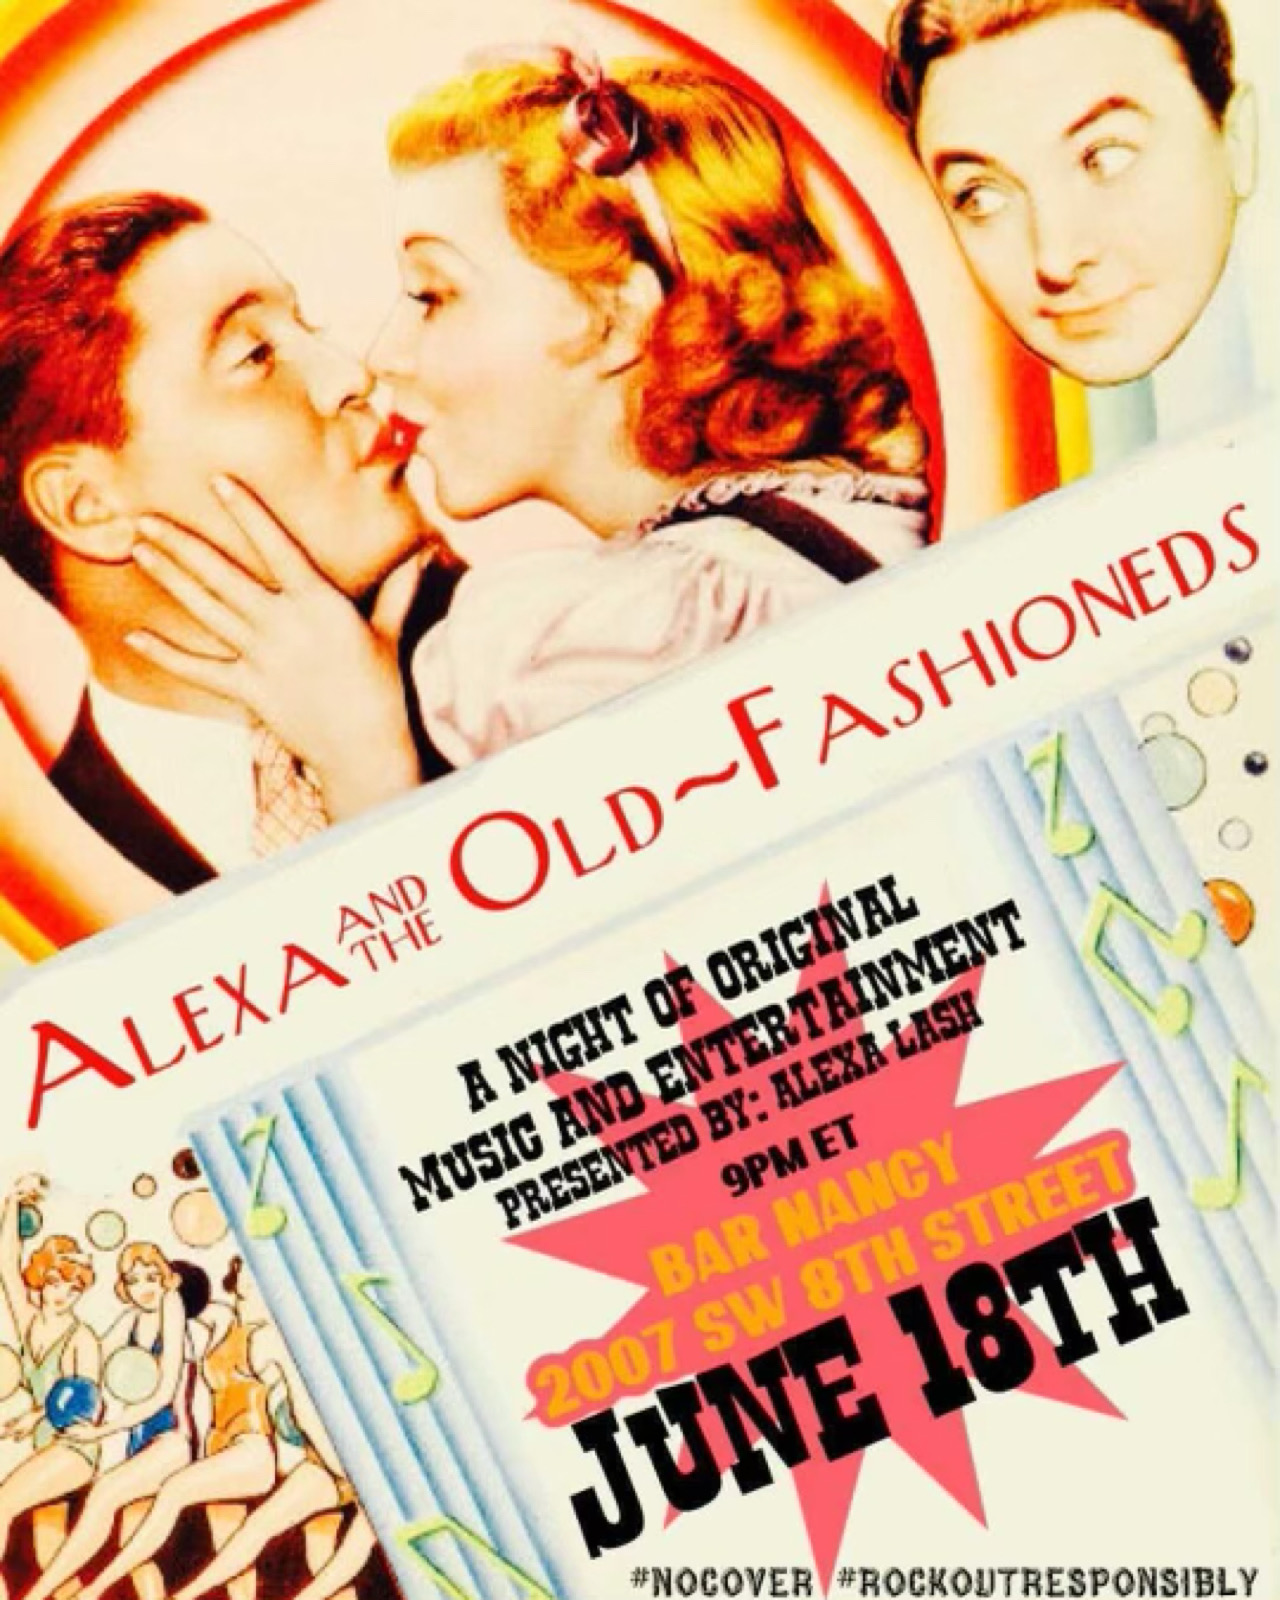 Alexa and the Old Fashioneds at Bar Nancy - June 18th